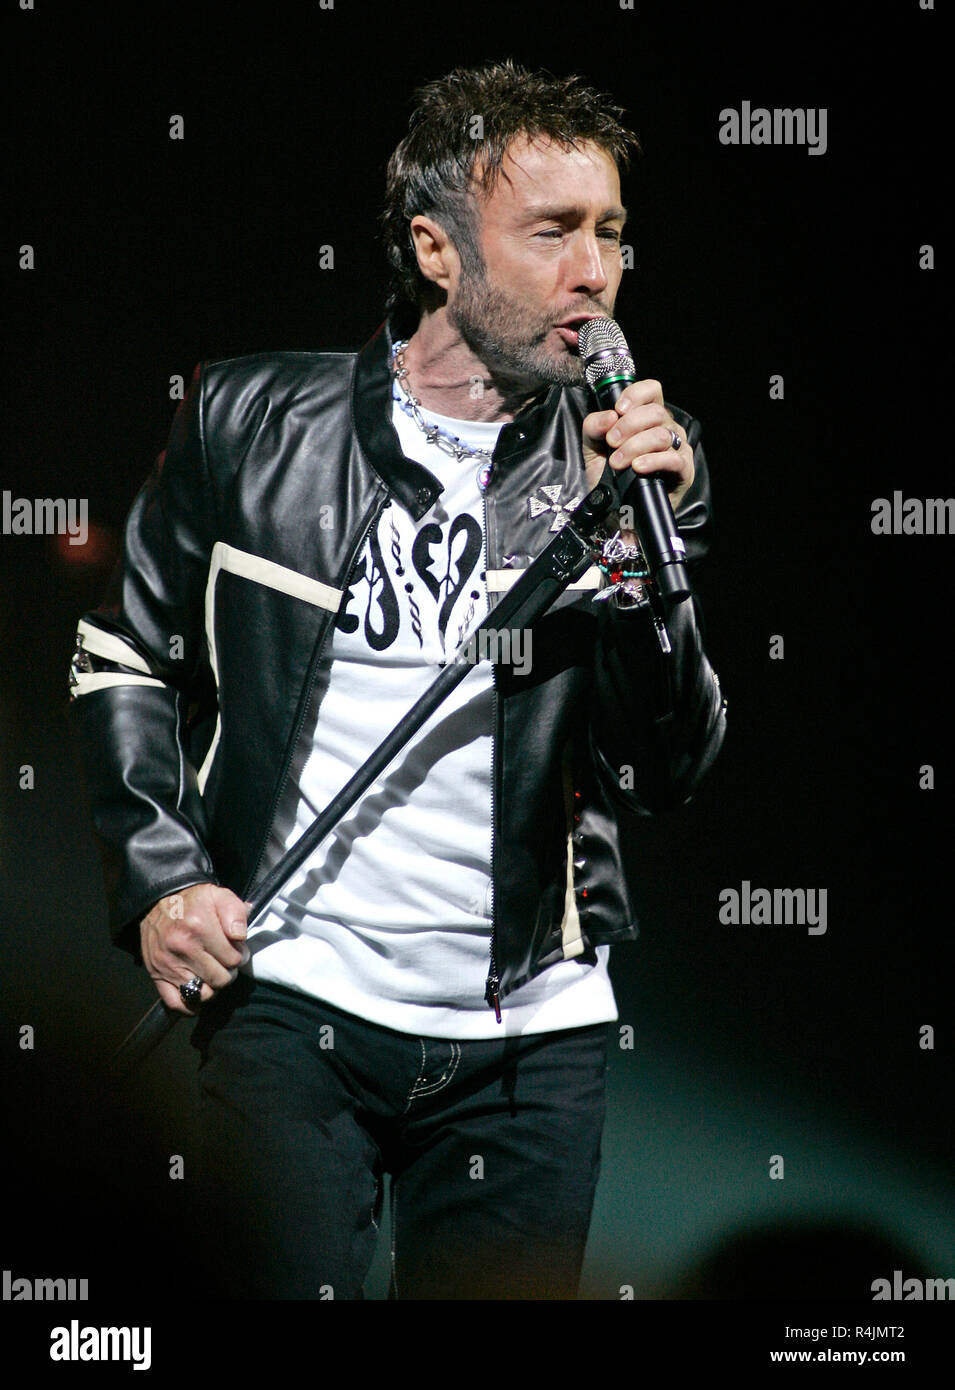 Paul Rodgers with Bad Company performs in concert at the Seminole Hard Rock Hotel and Casino in Hollywood, Florida on August 8, 2008. Stock Photo